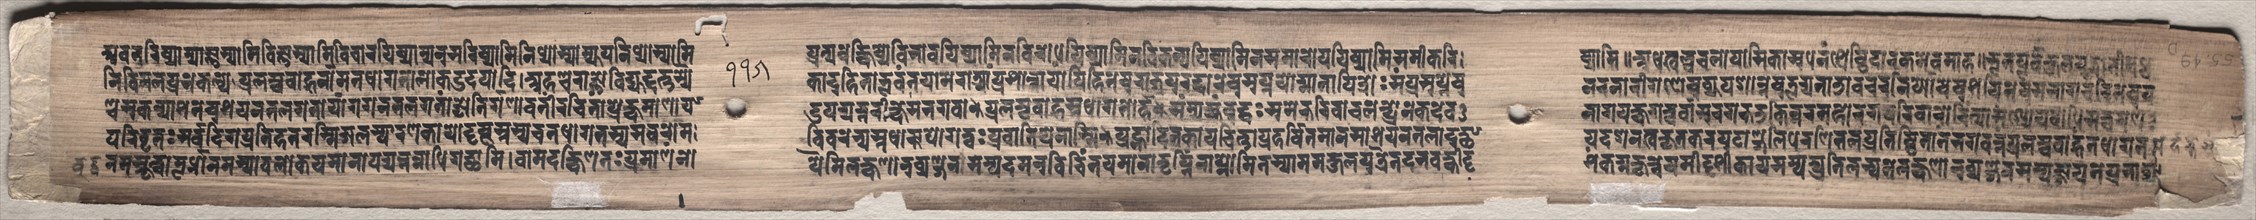 Leaf from Gandavyuha: text, from Chapter 22 Achala (verso), 1000-1100s. Eastern India, Pala period.